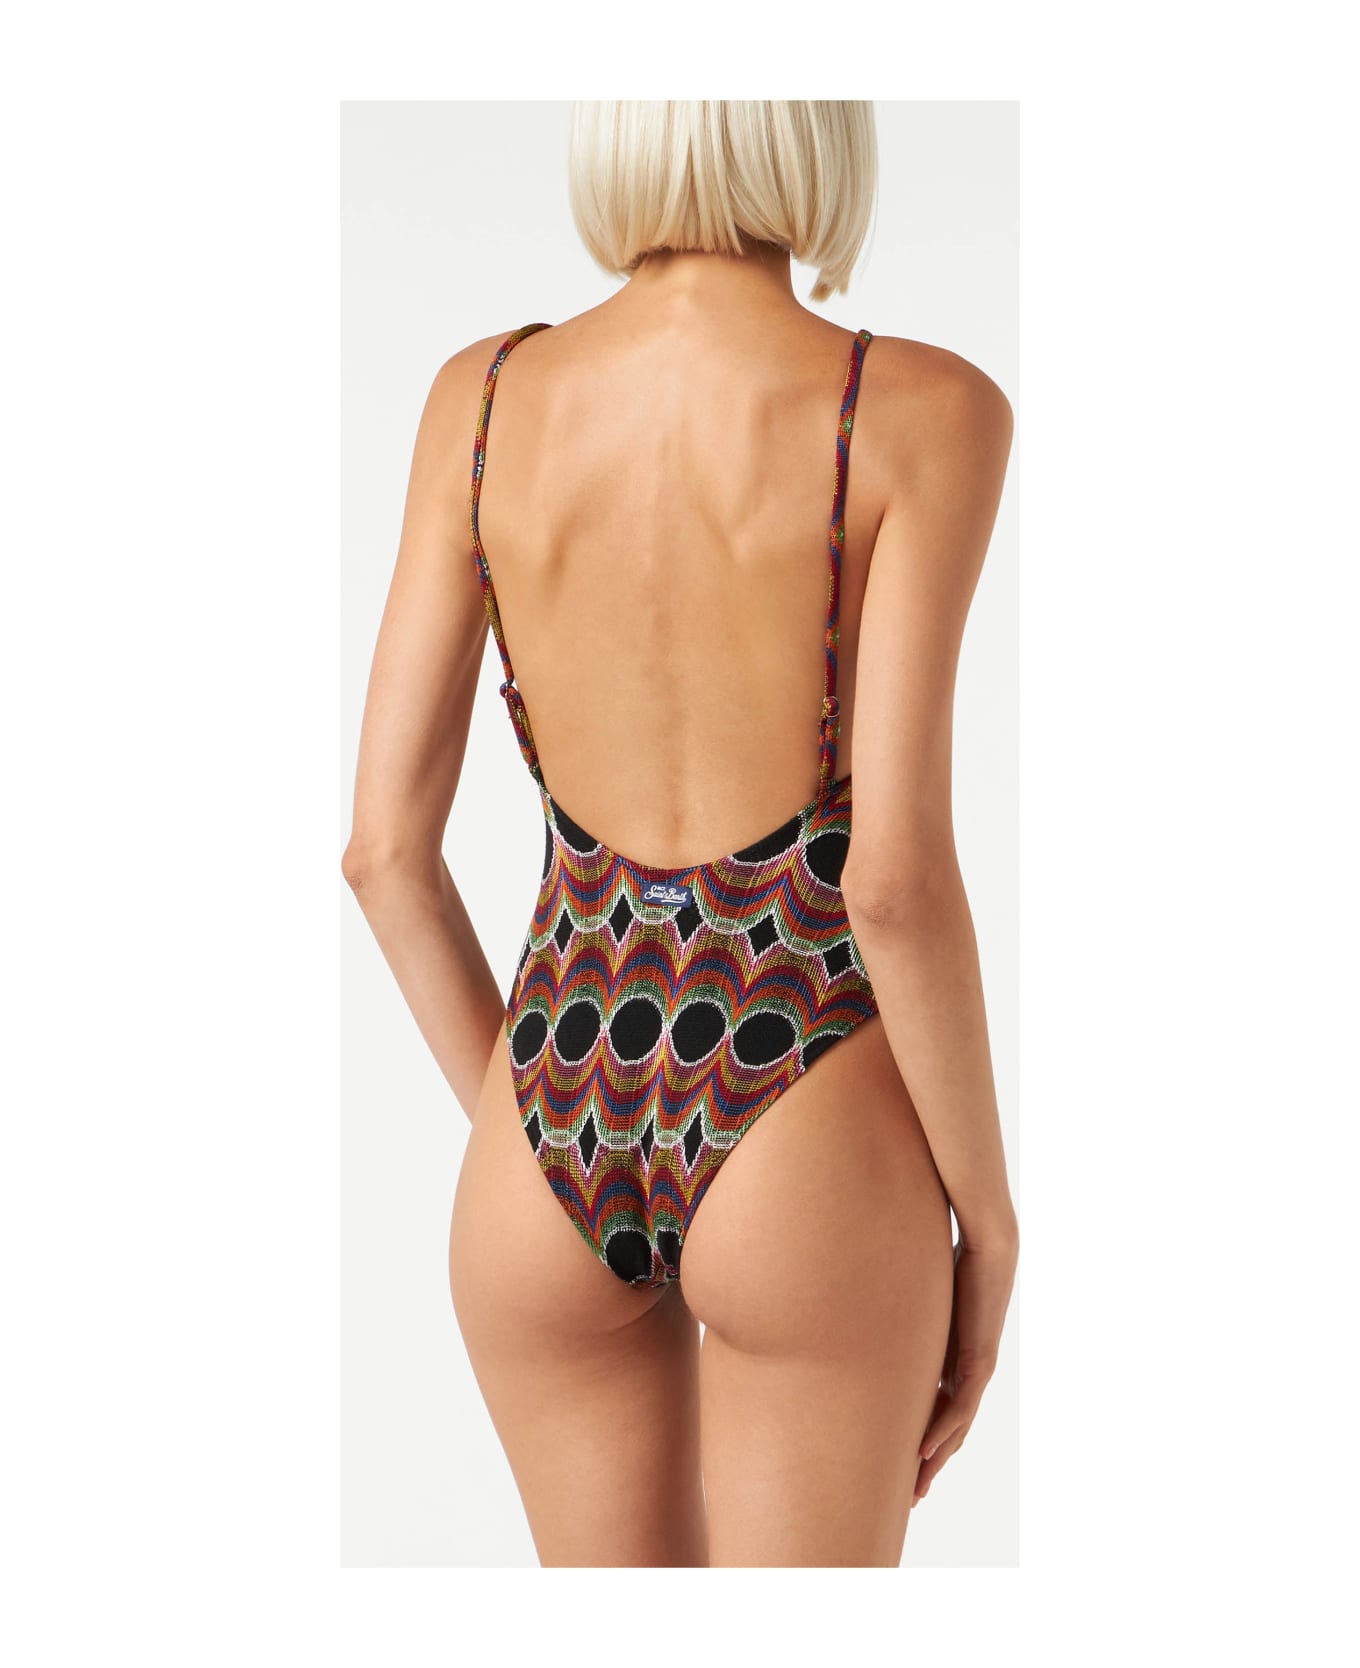 MC2 Saint Barth Woman One Piece Swimsuit With Pattern - BROWN ワンピース